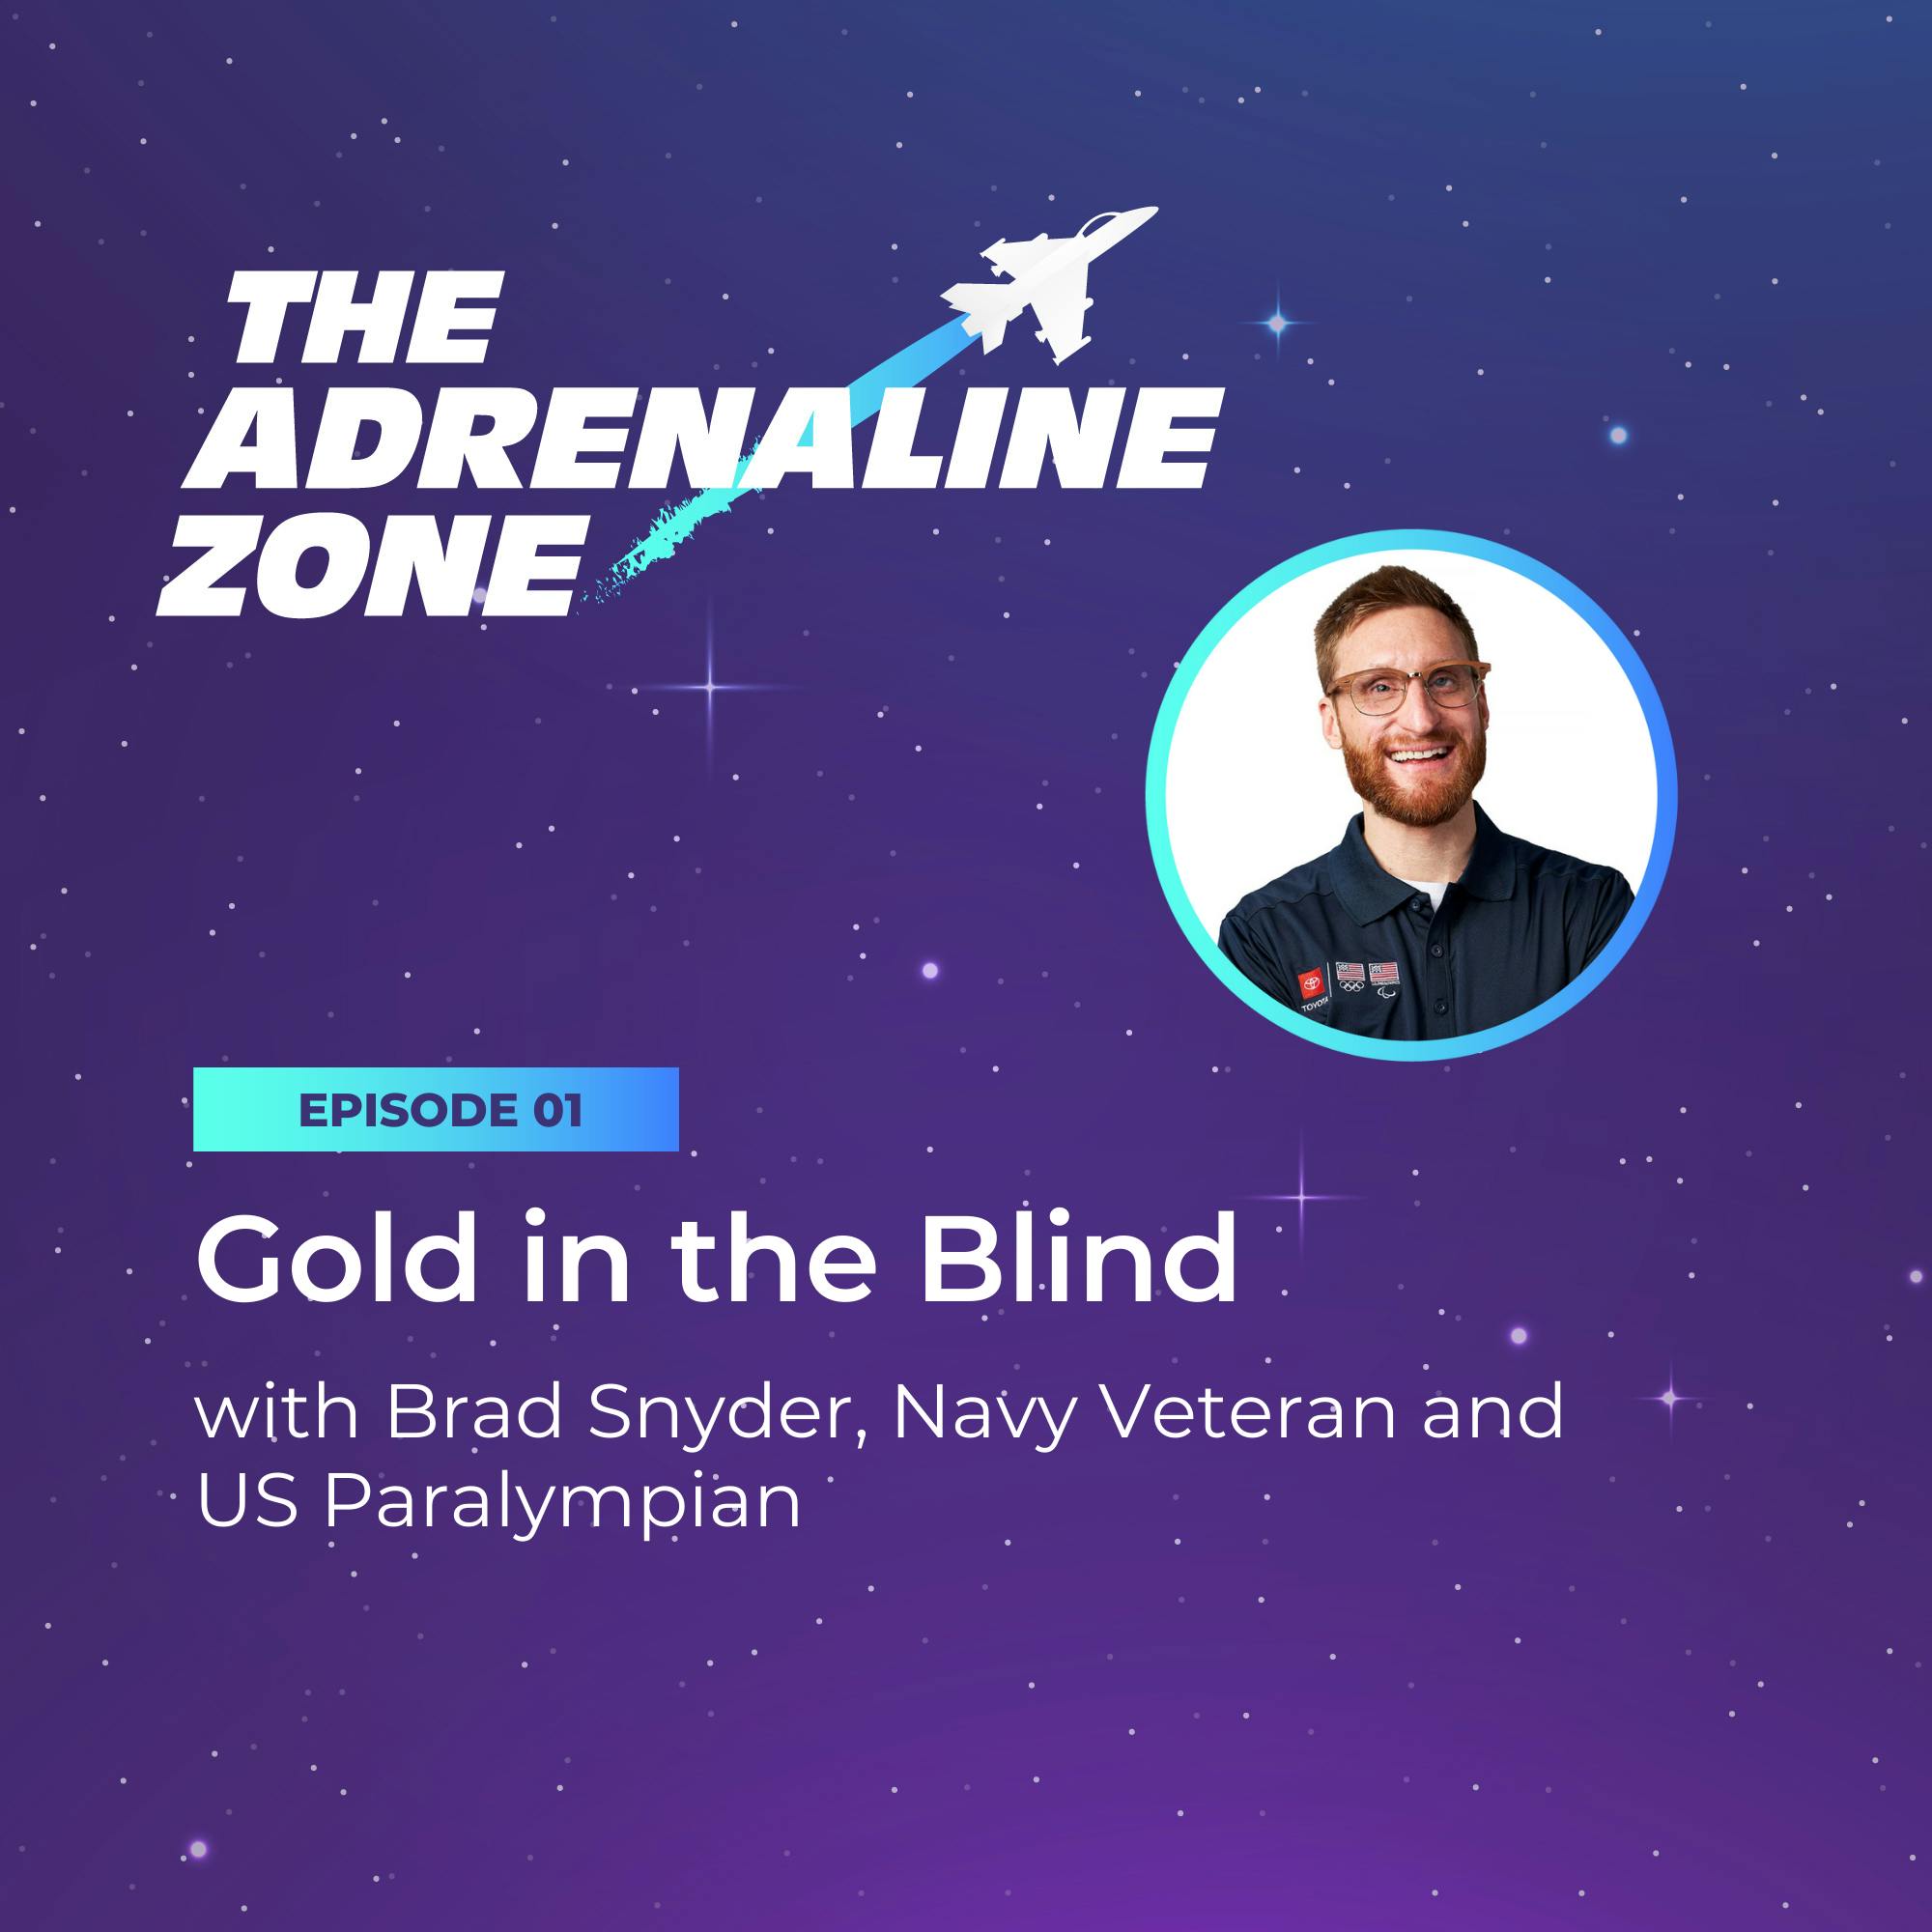 Gold in the Blind with Brad Snyder, Navy Veteran and US Paralympian